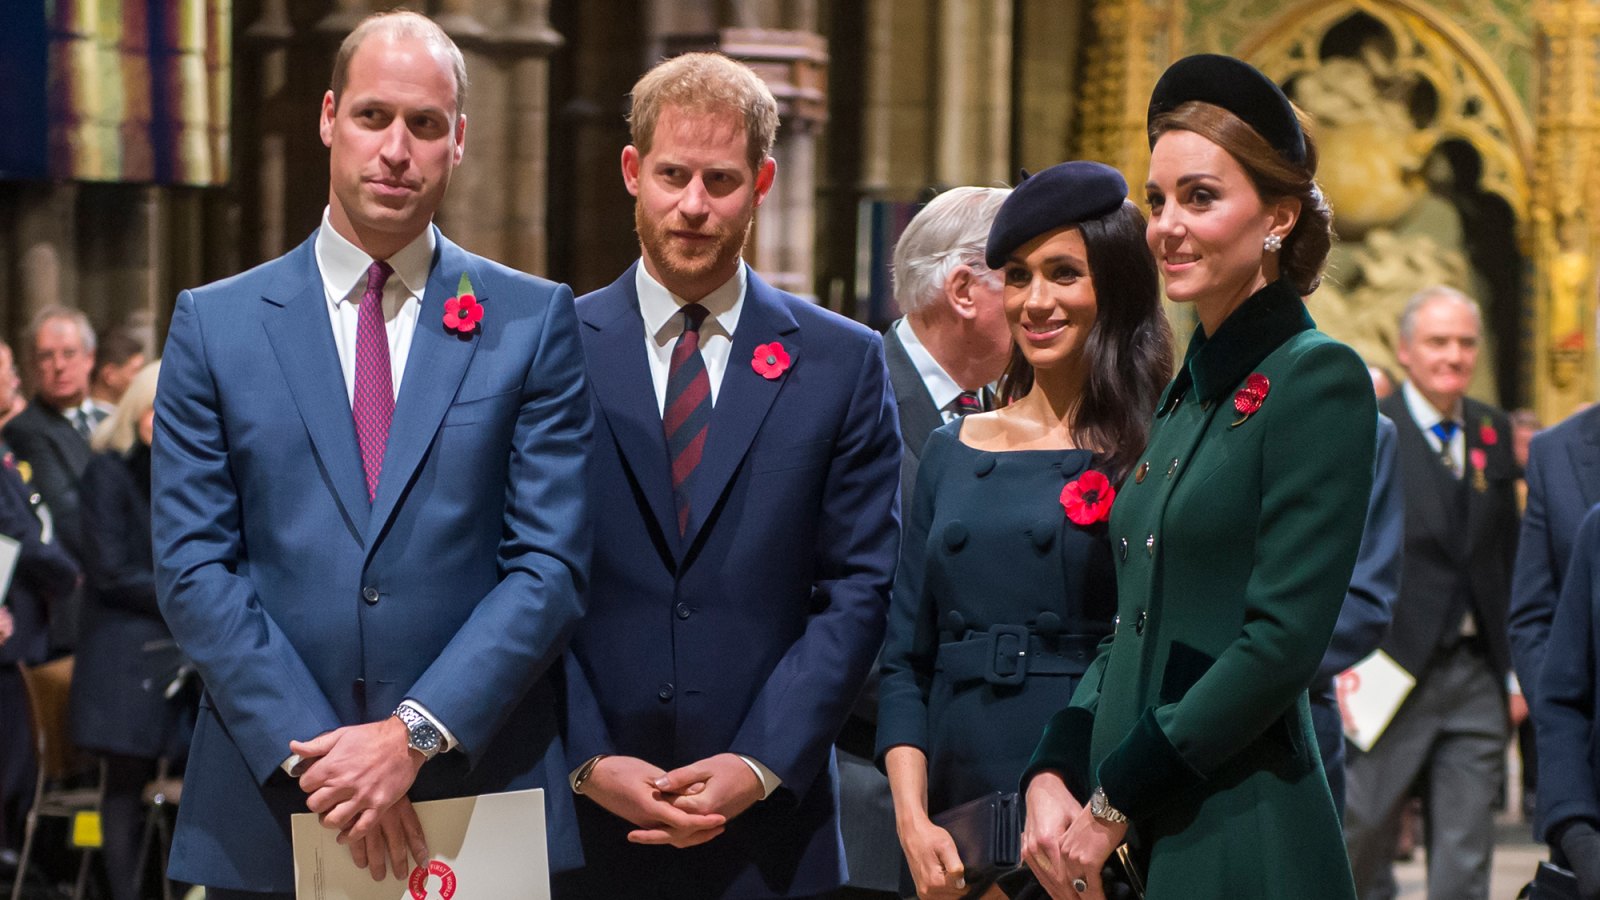 Prince William, Duke of Cambridge and Catherine, Duchess of Cambridge, Prince Harry, Duke of Sussex and Meghan, Duchess of Sussex.